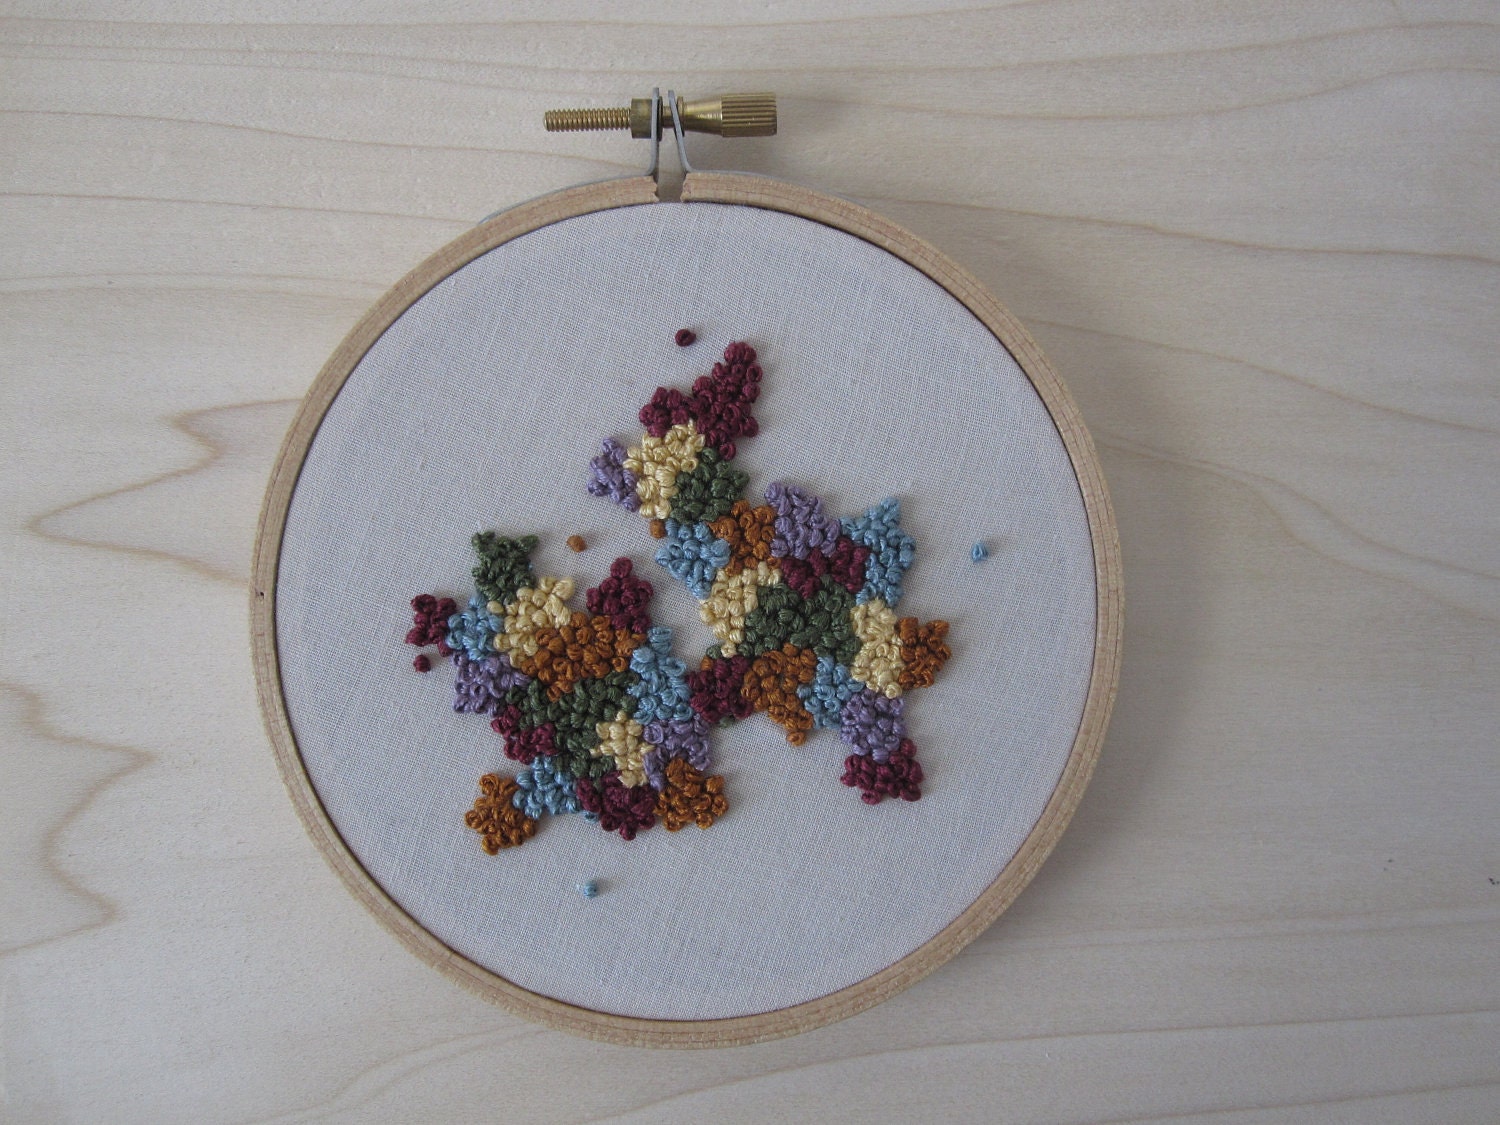 French Knot Embroidery Hoop